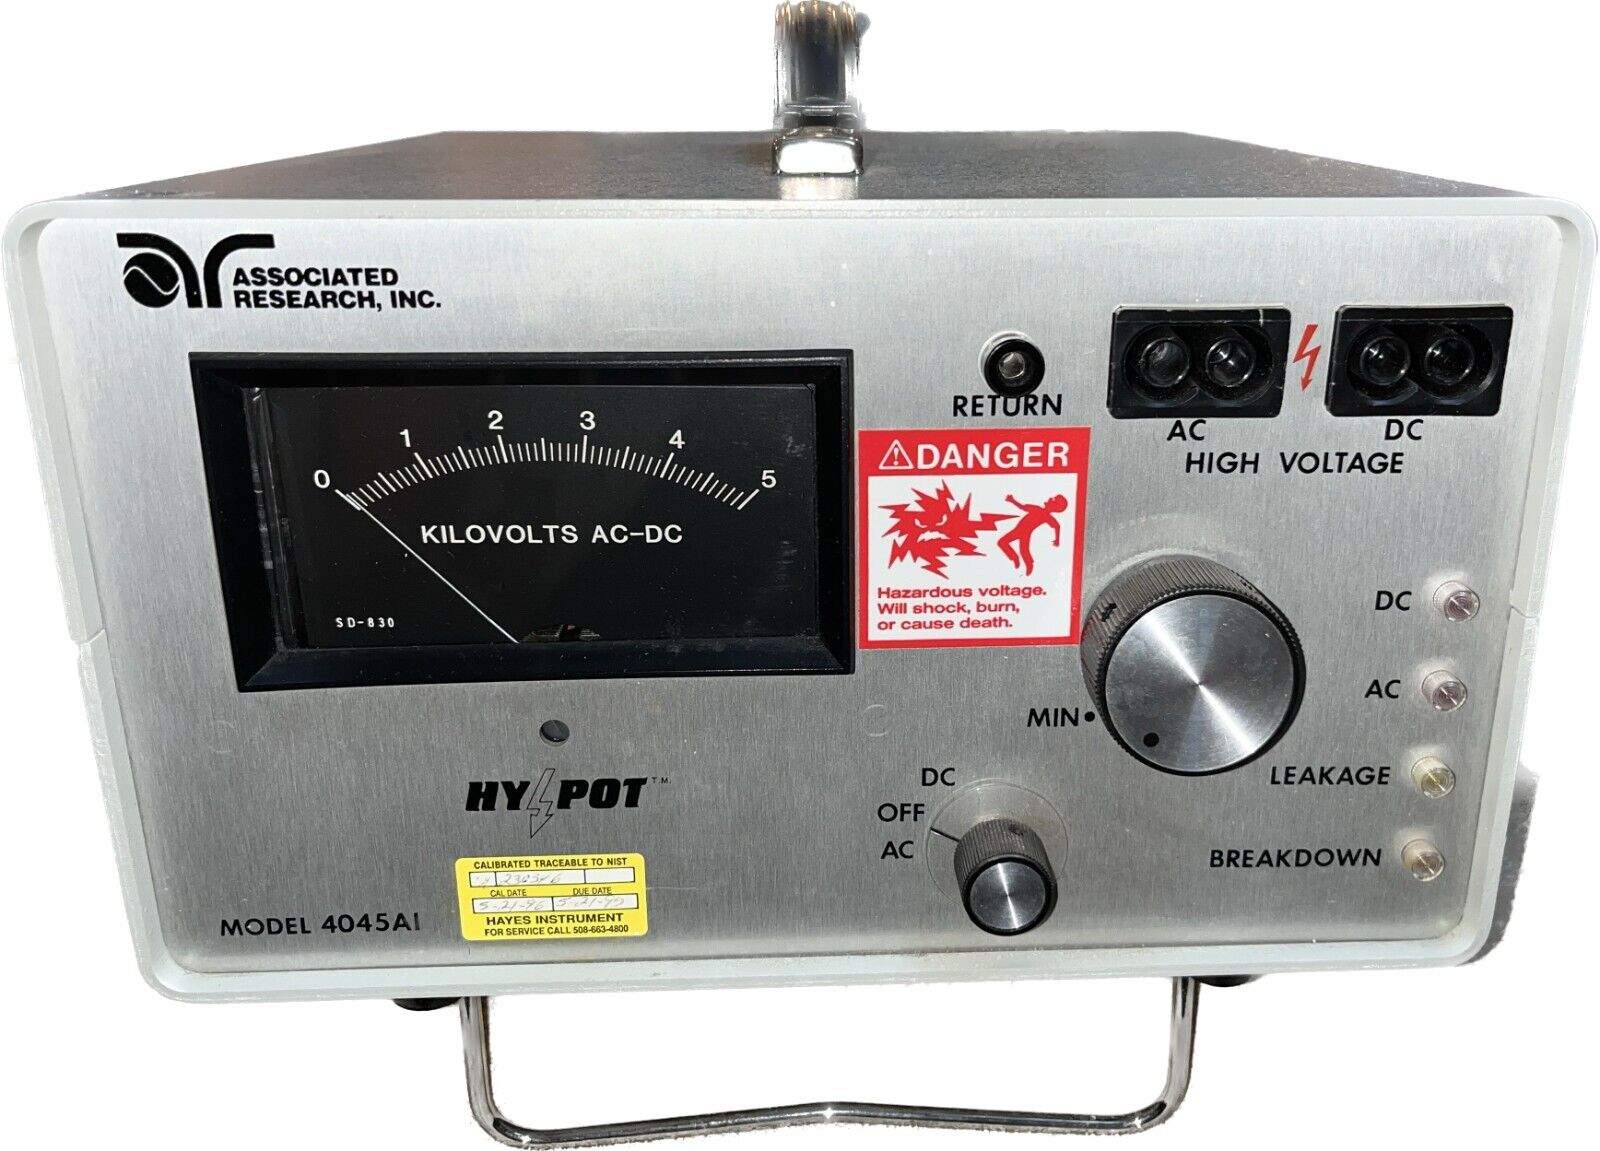 Associated Research 4045AI AC/DC Junior Hypot dielectric testing device